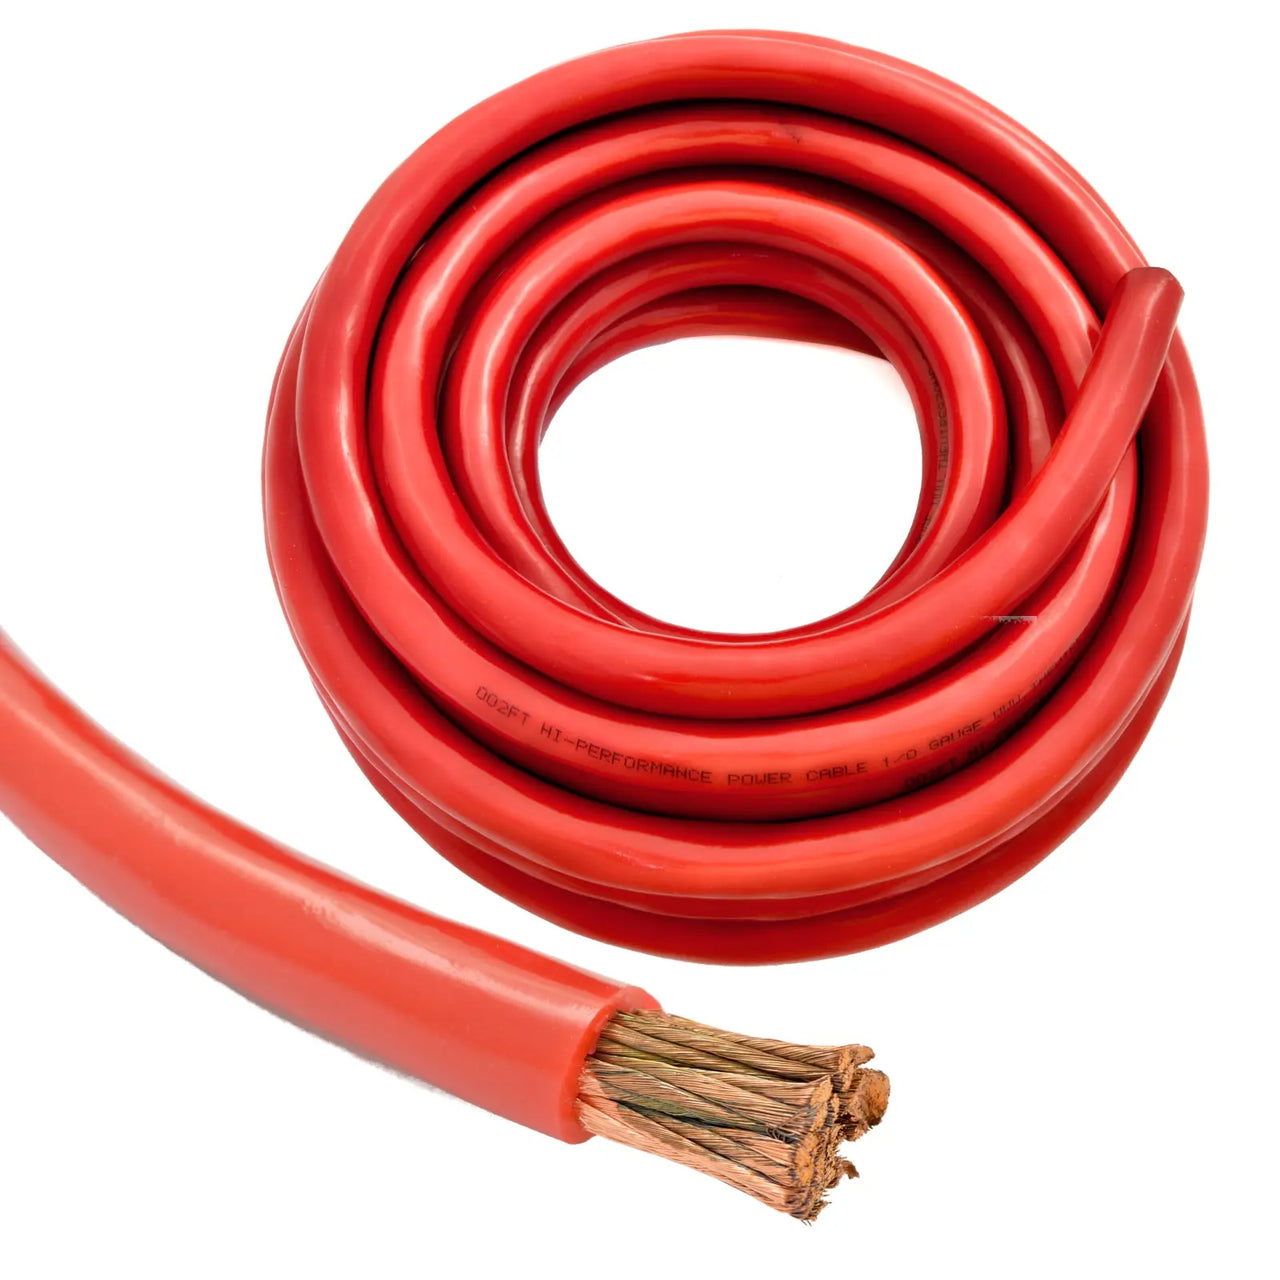 2 Absolute SPW-0-50RD 1/0 Gauge 50 FT Xtreme Twisted Power/Ground Battery Wire Cables Red